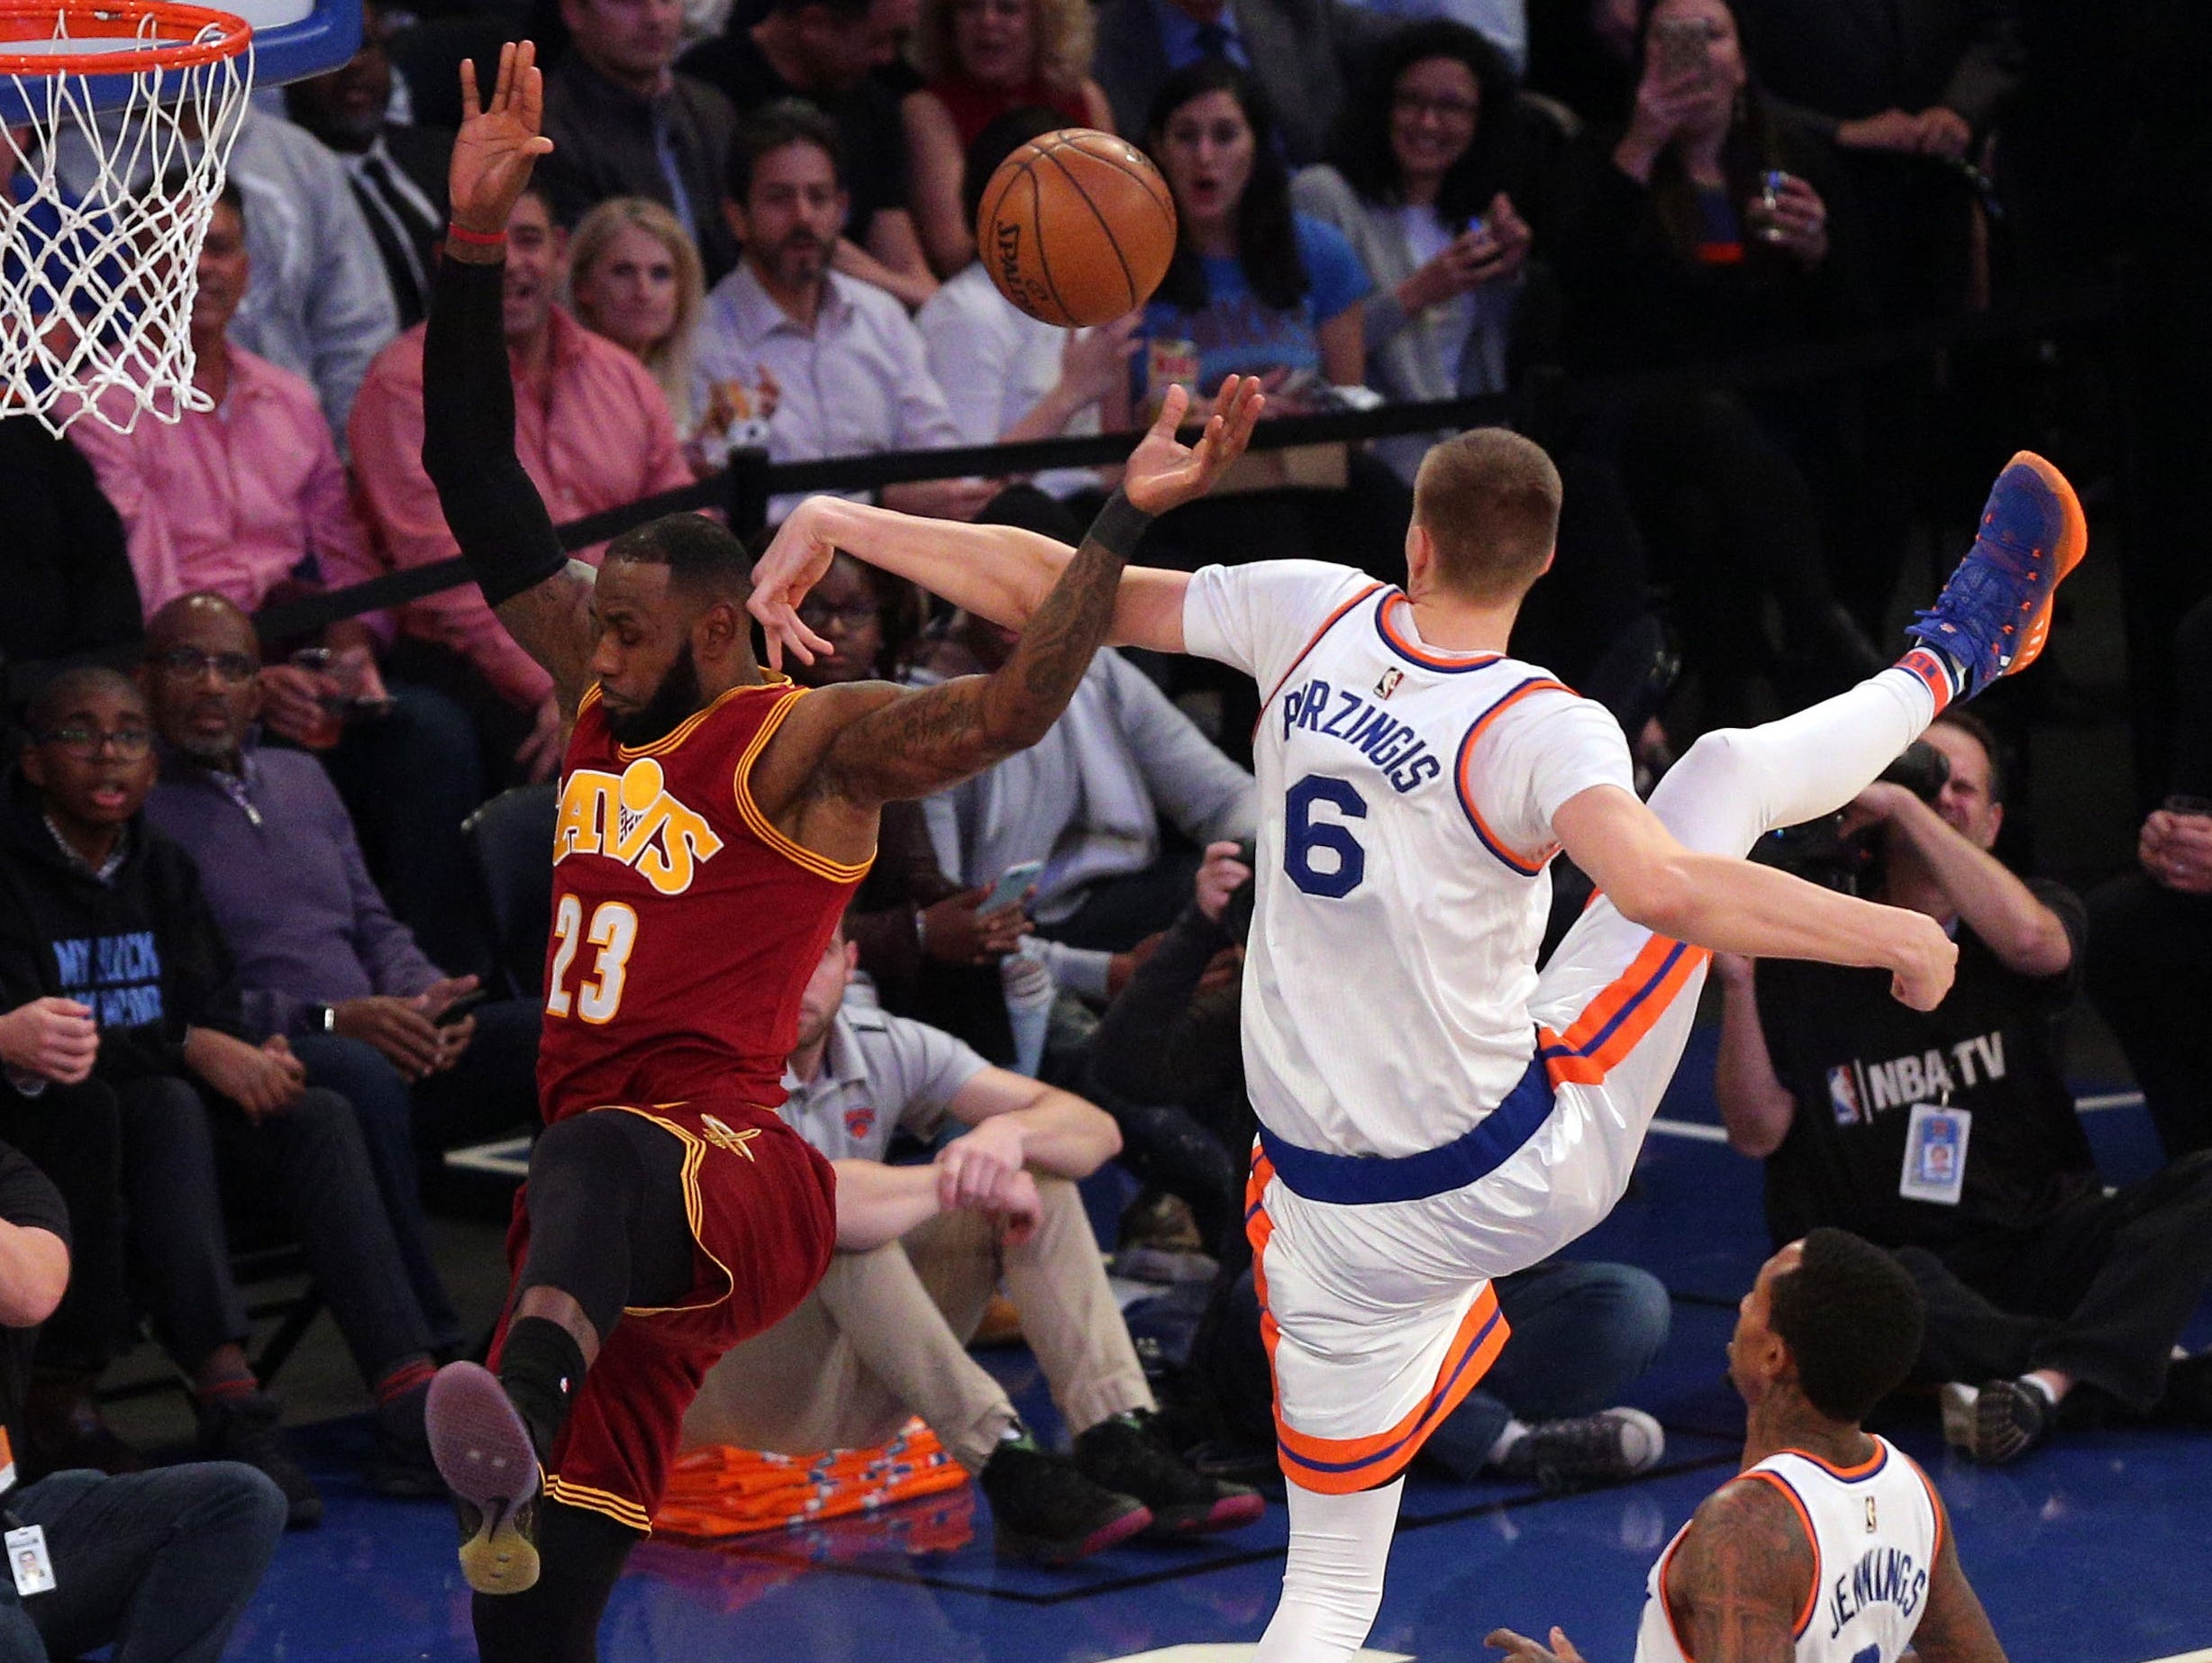 Dec. 7, 2016: Knicks defender Kristaps Porzingis (6) fouls Cavaliers forward LeBron James (23) on a first-half drive at Madison Square Garden. James shook off the hit to score 25 points in a Cleveland rout.